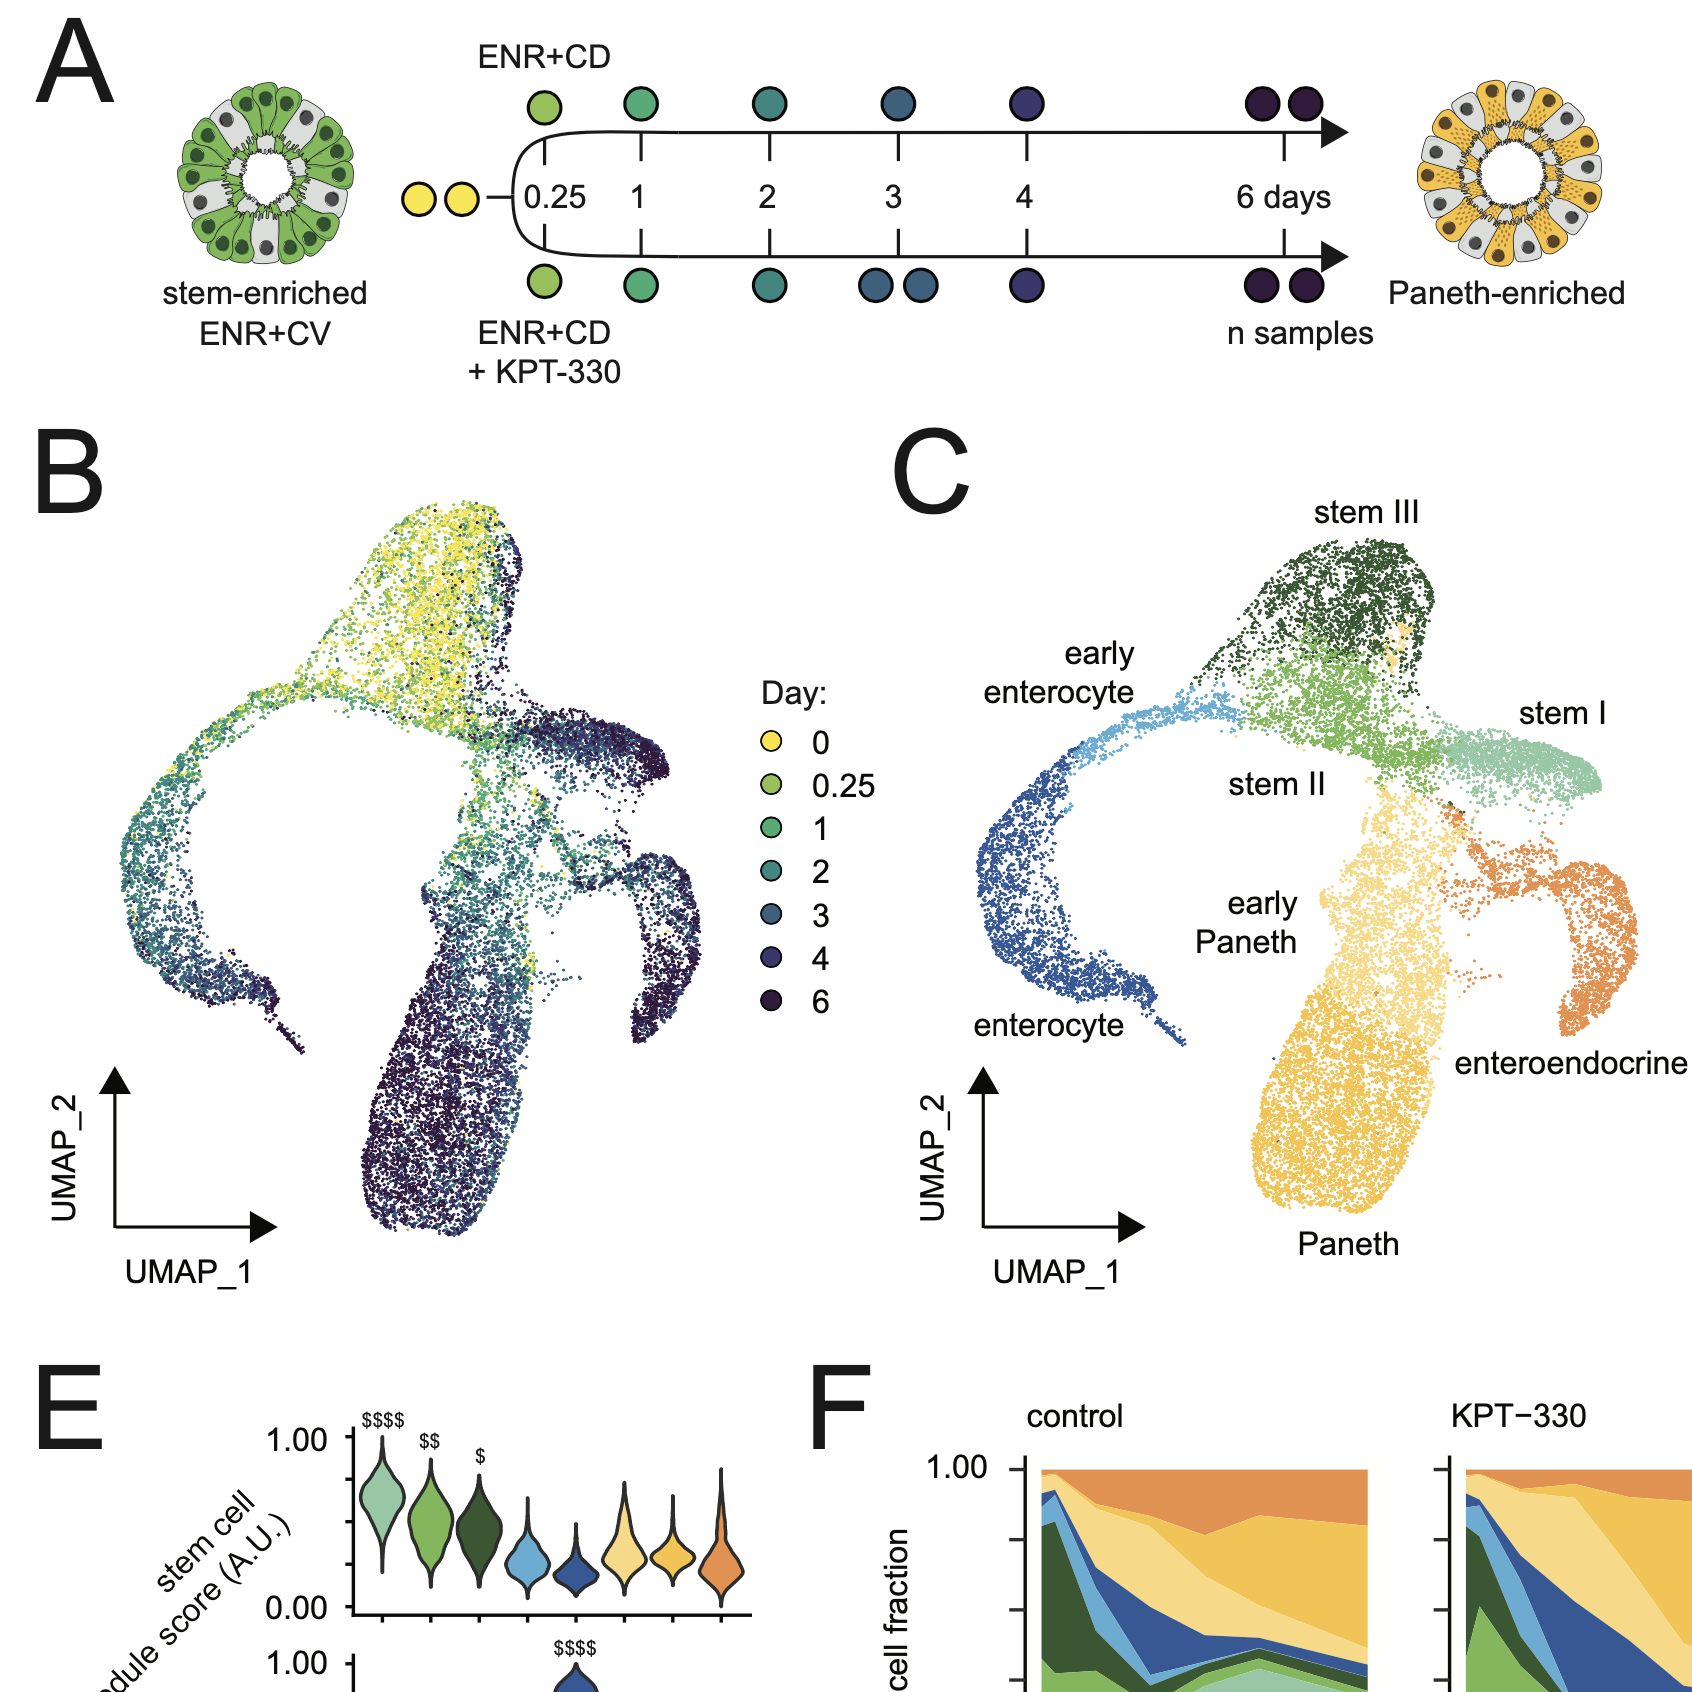 High-throughput organoid screening enables engineering of intestinal epithelial composition